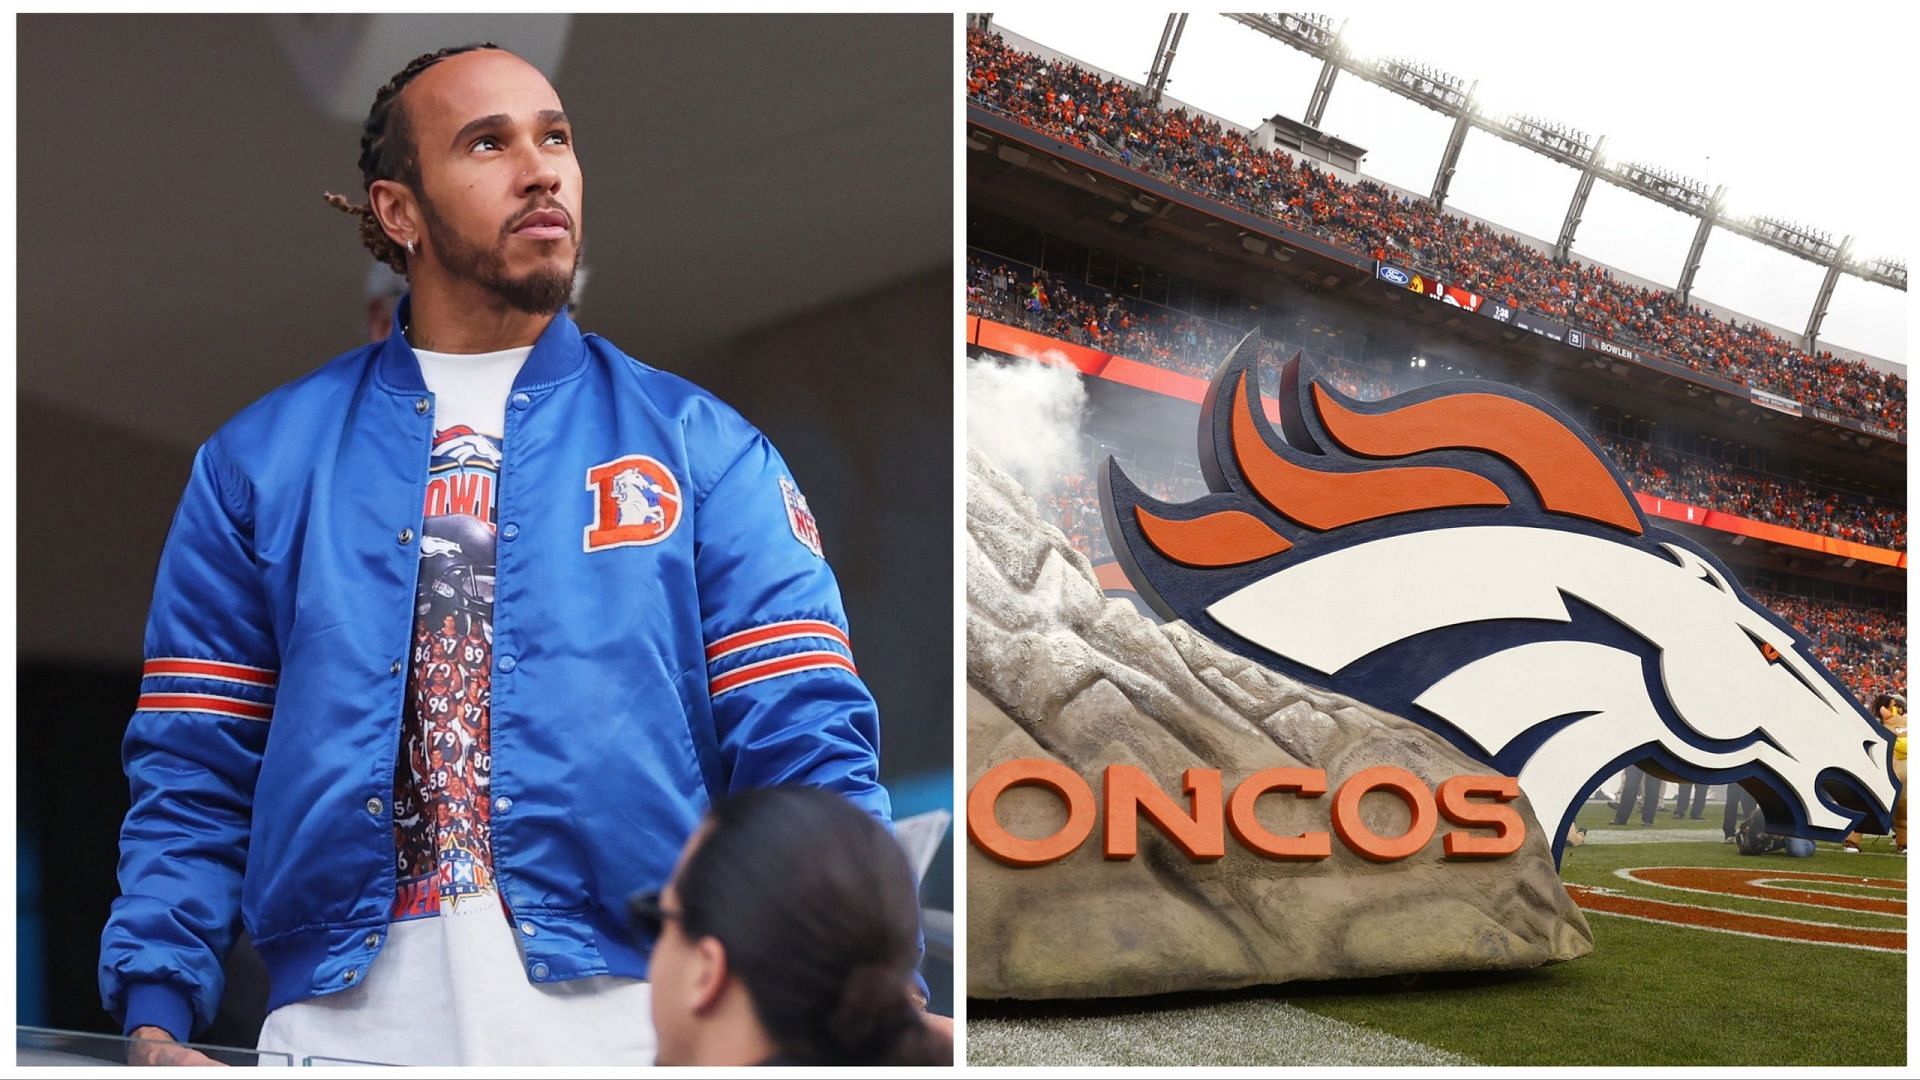 Lewis Hamilton spotted wearing the throwback Denver Broncos jersey